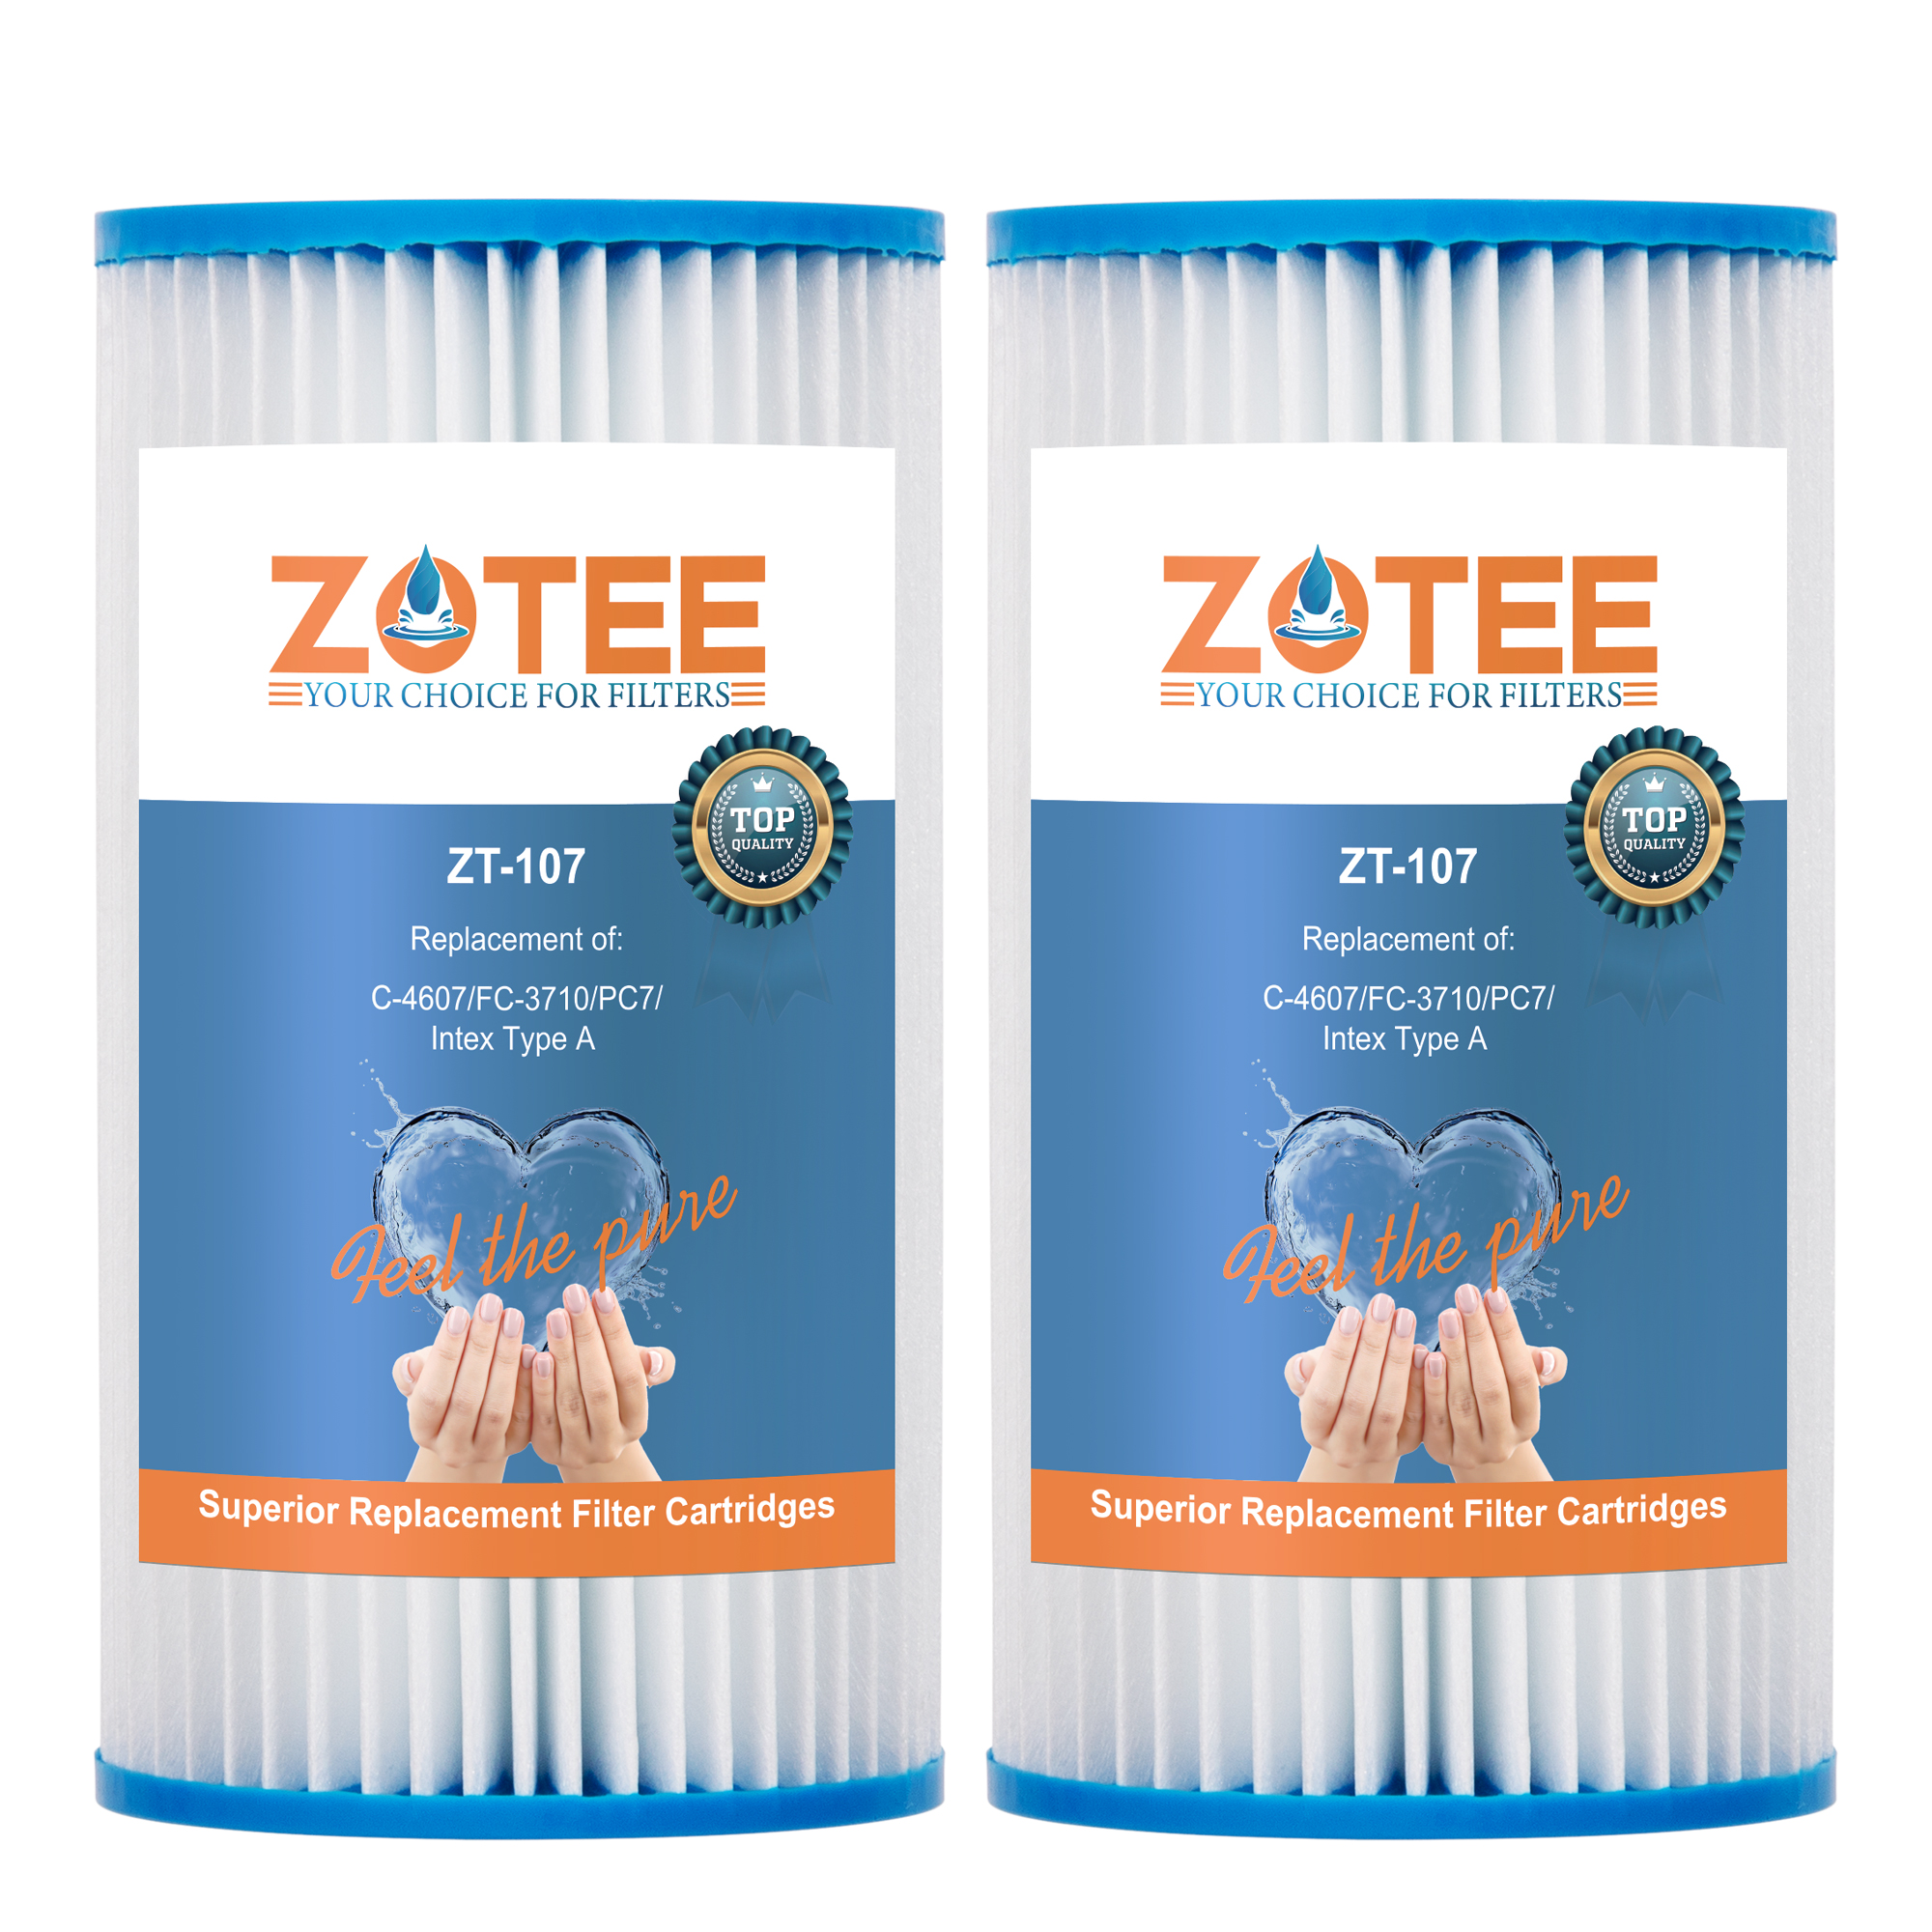 ZOTEE Swimming Pool and Hot Tub Spa Cartridge with Heavy Duty Ultimate Filtration Paper for Intex Type B,29005E,59905E,Pleatco-PIN20,Unicel C-5315,Filbur FC-3752 Hot Tub Spa Filter,2 Pack 